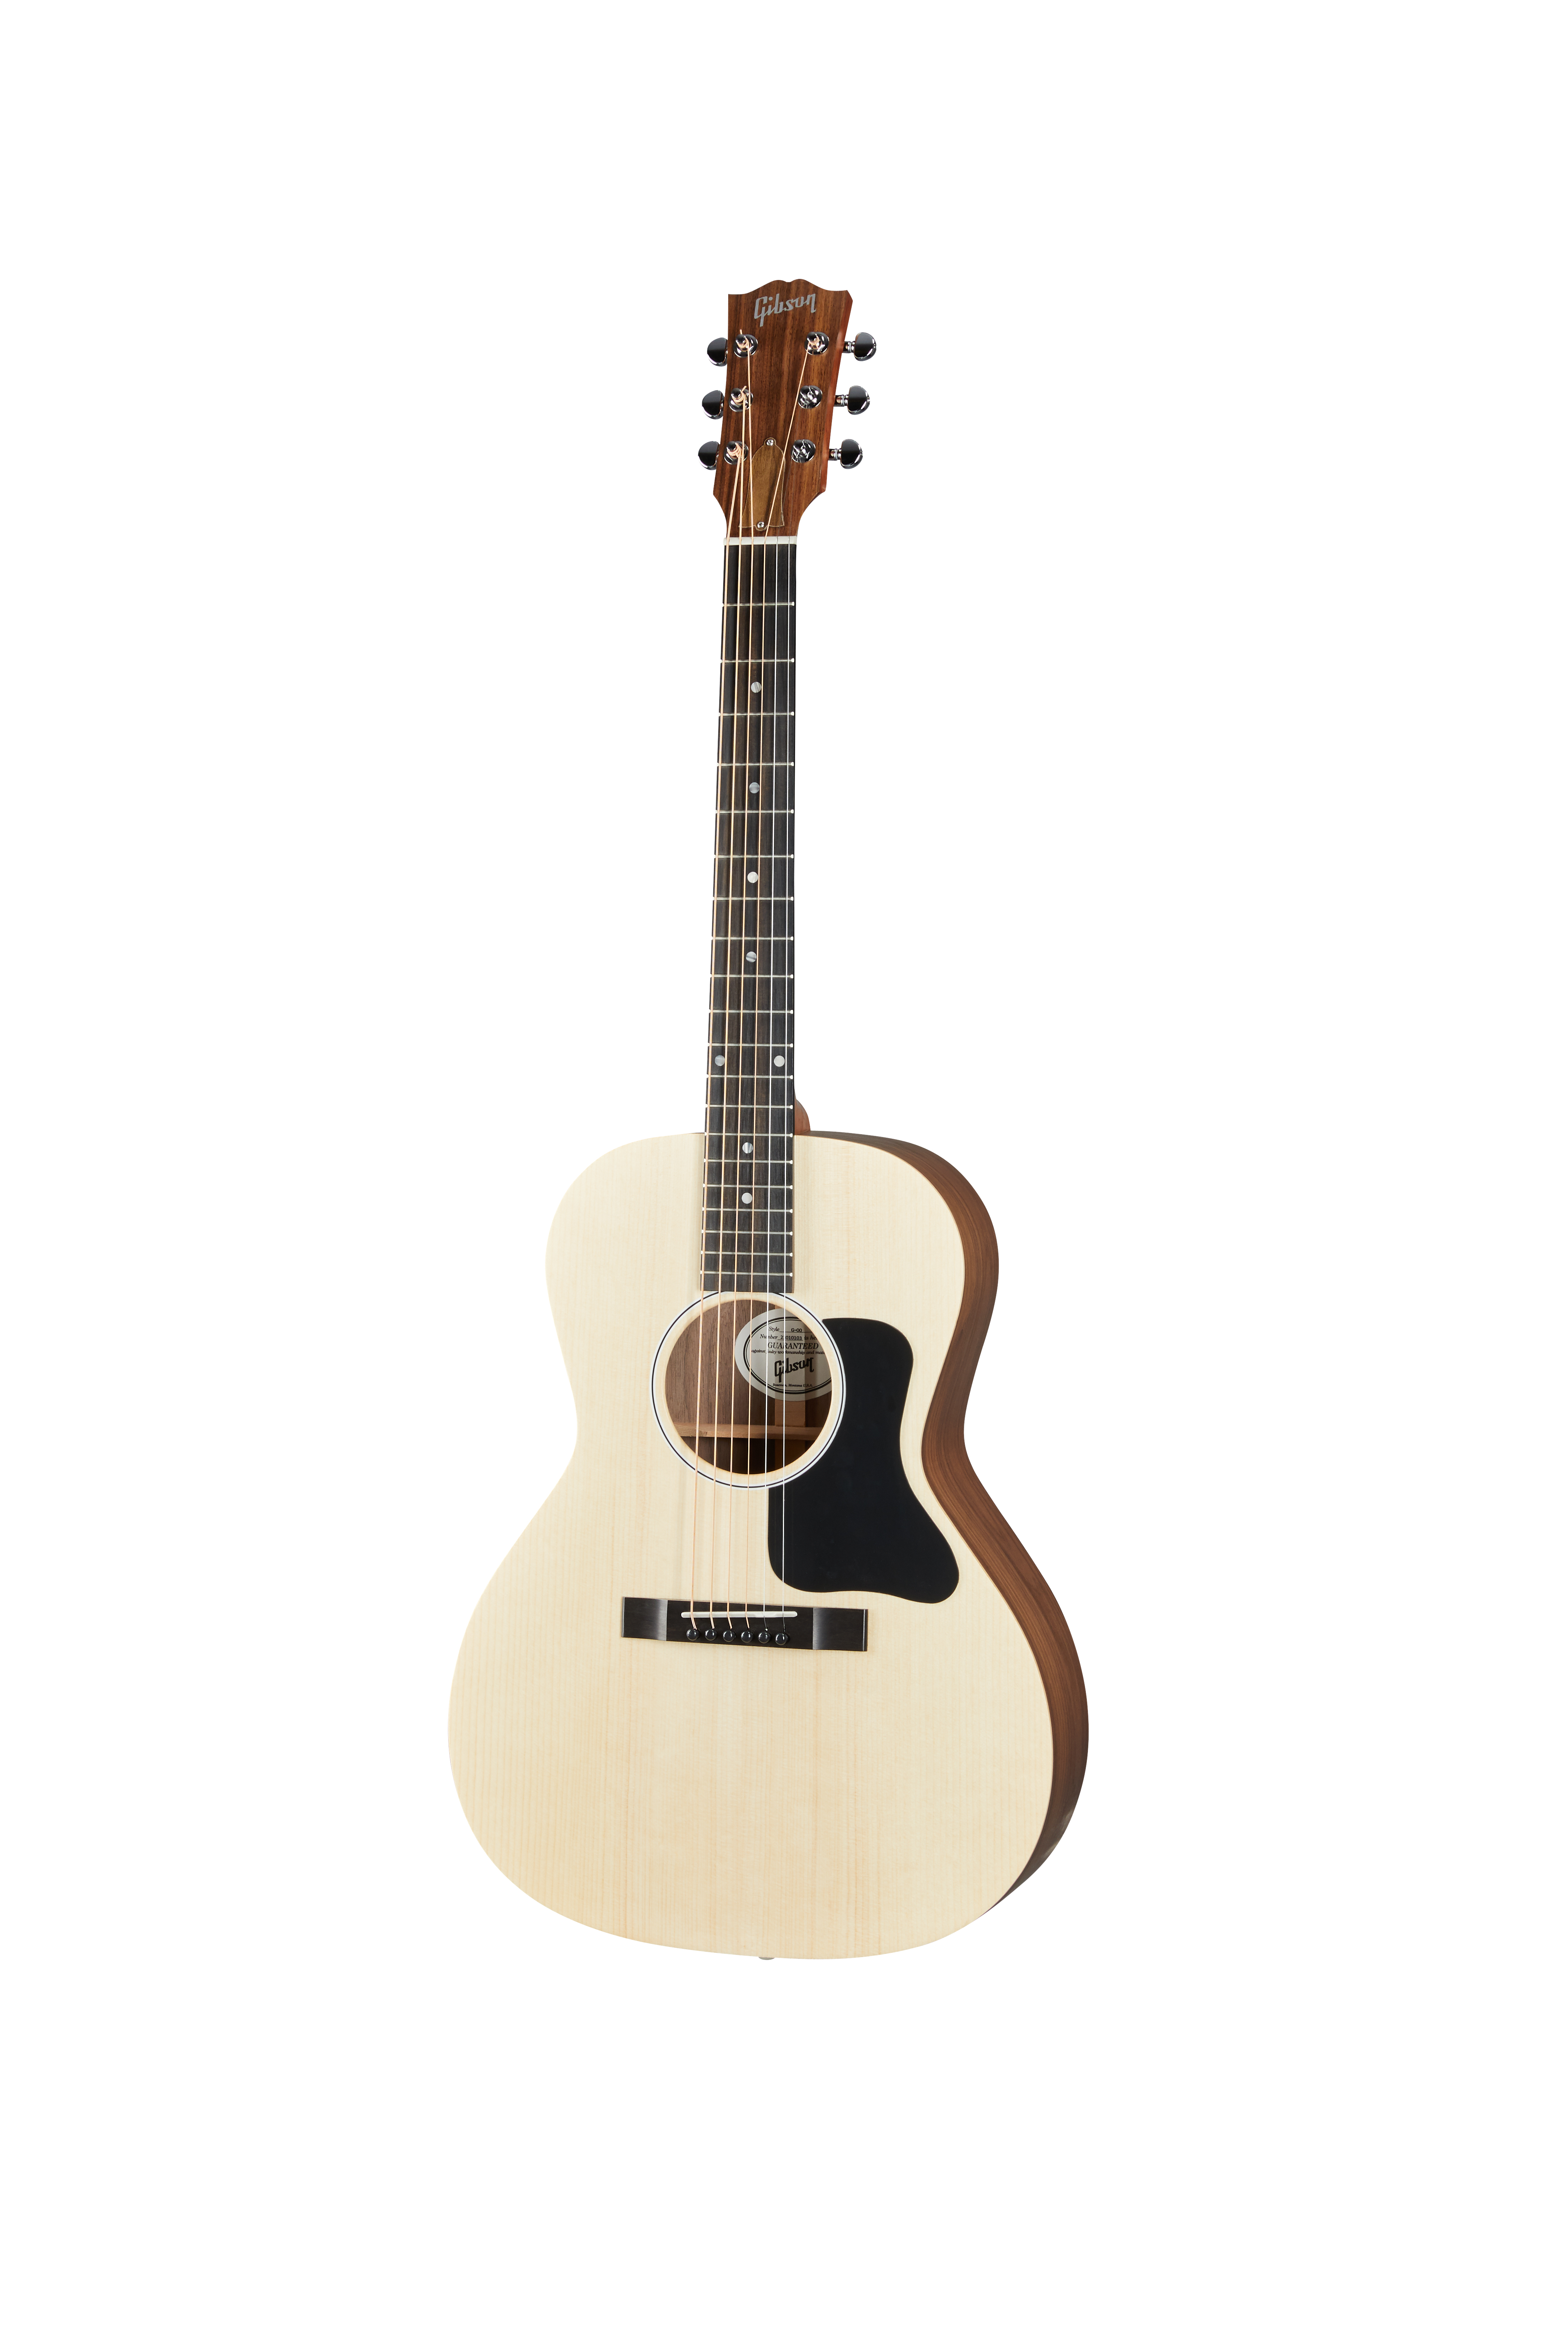 https://static.gibson.com/product-images/Acoustic/ACCPRZ624/Natural/MCSBG0AN_front.jpg